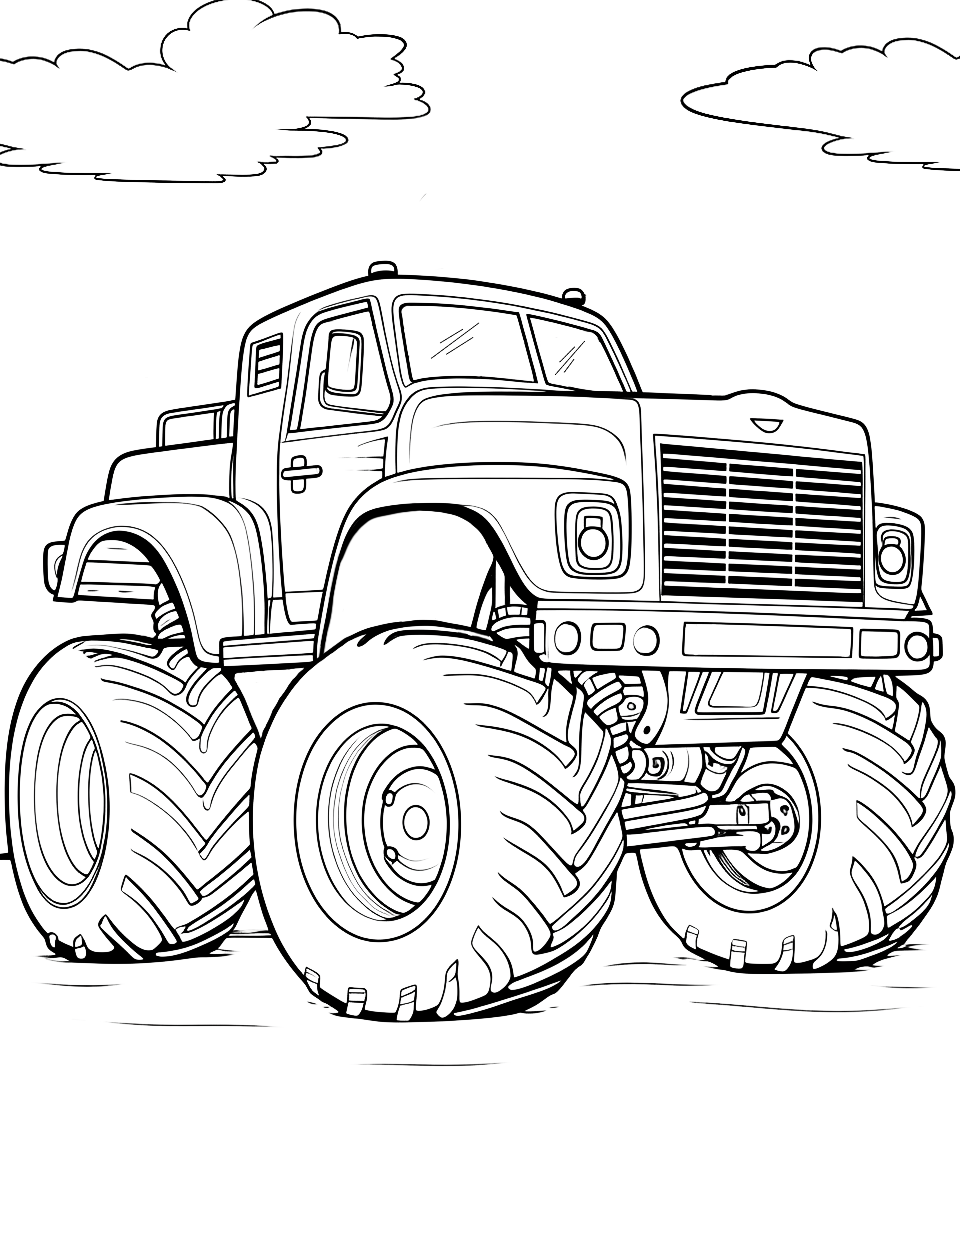 Big Wheel Truck Monster Coloring Page - A massive monster truck with oversized wheels.